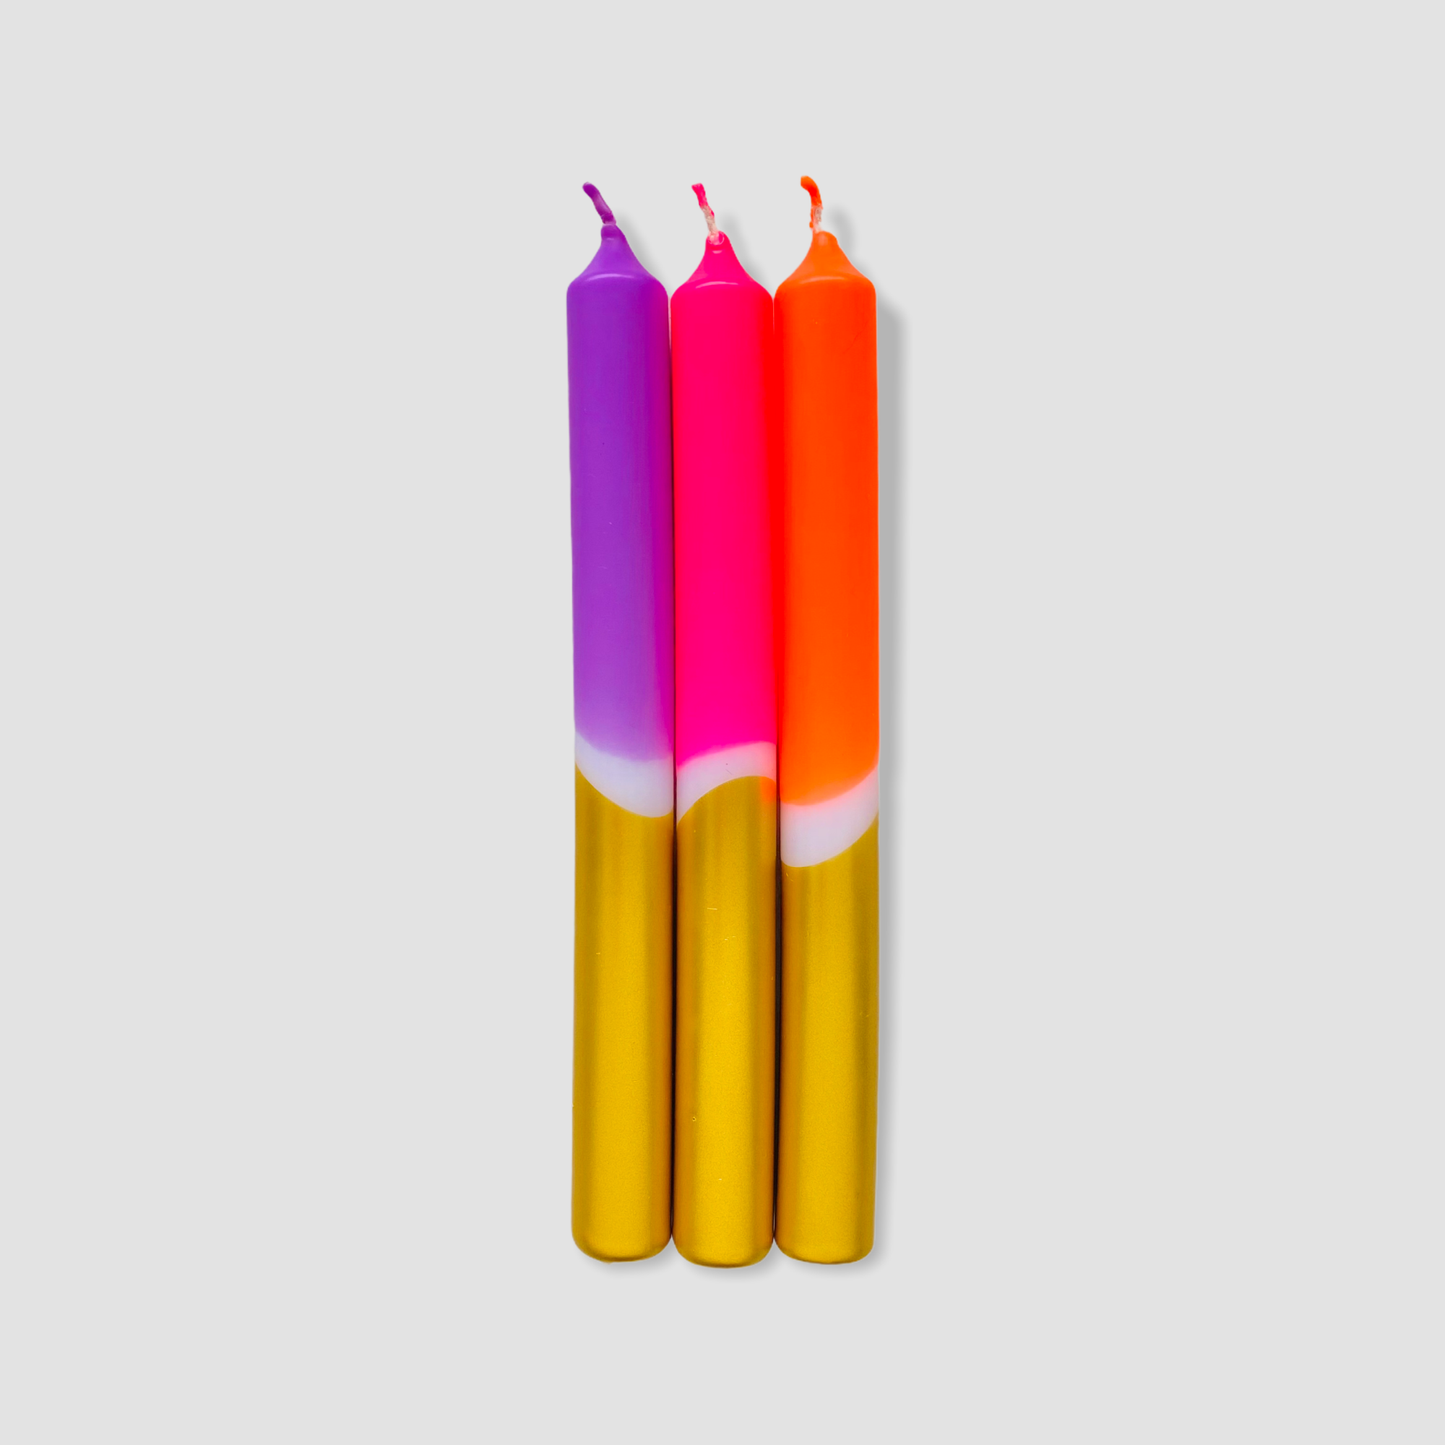 "Christmas" Dip Dye Neon Candles Limited Edition